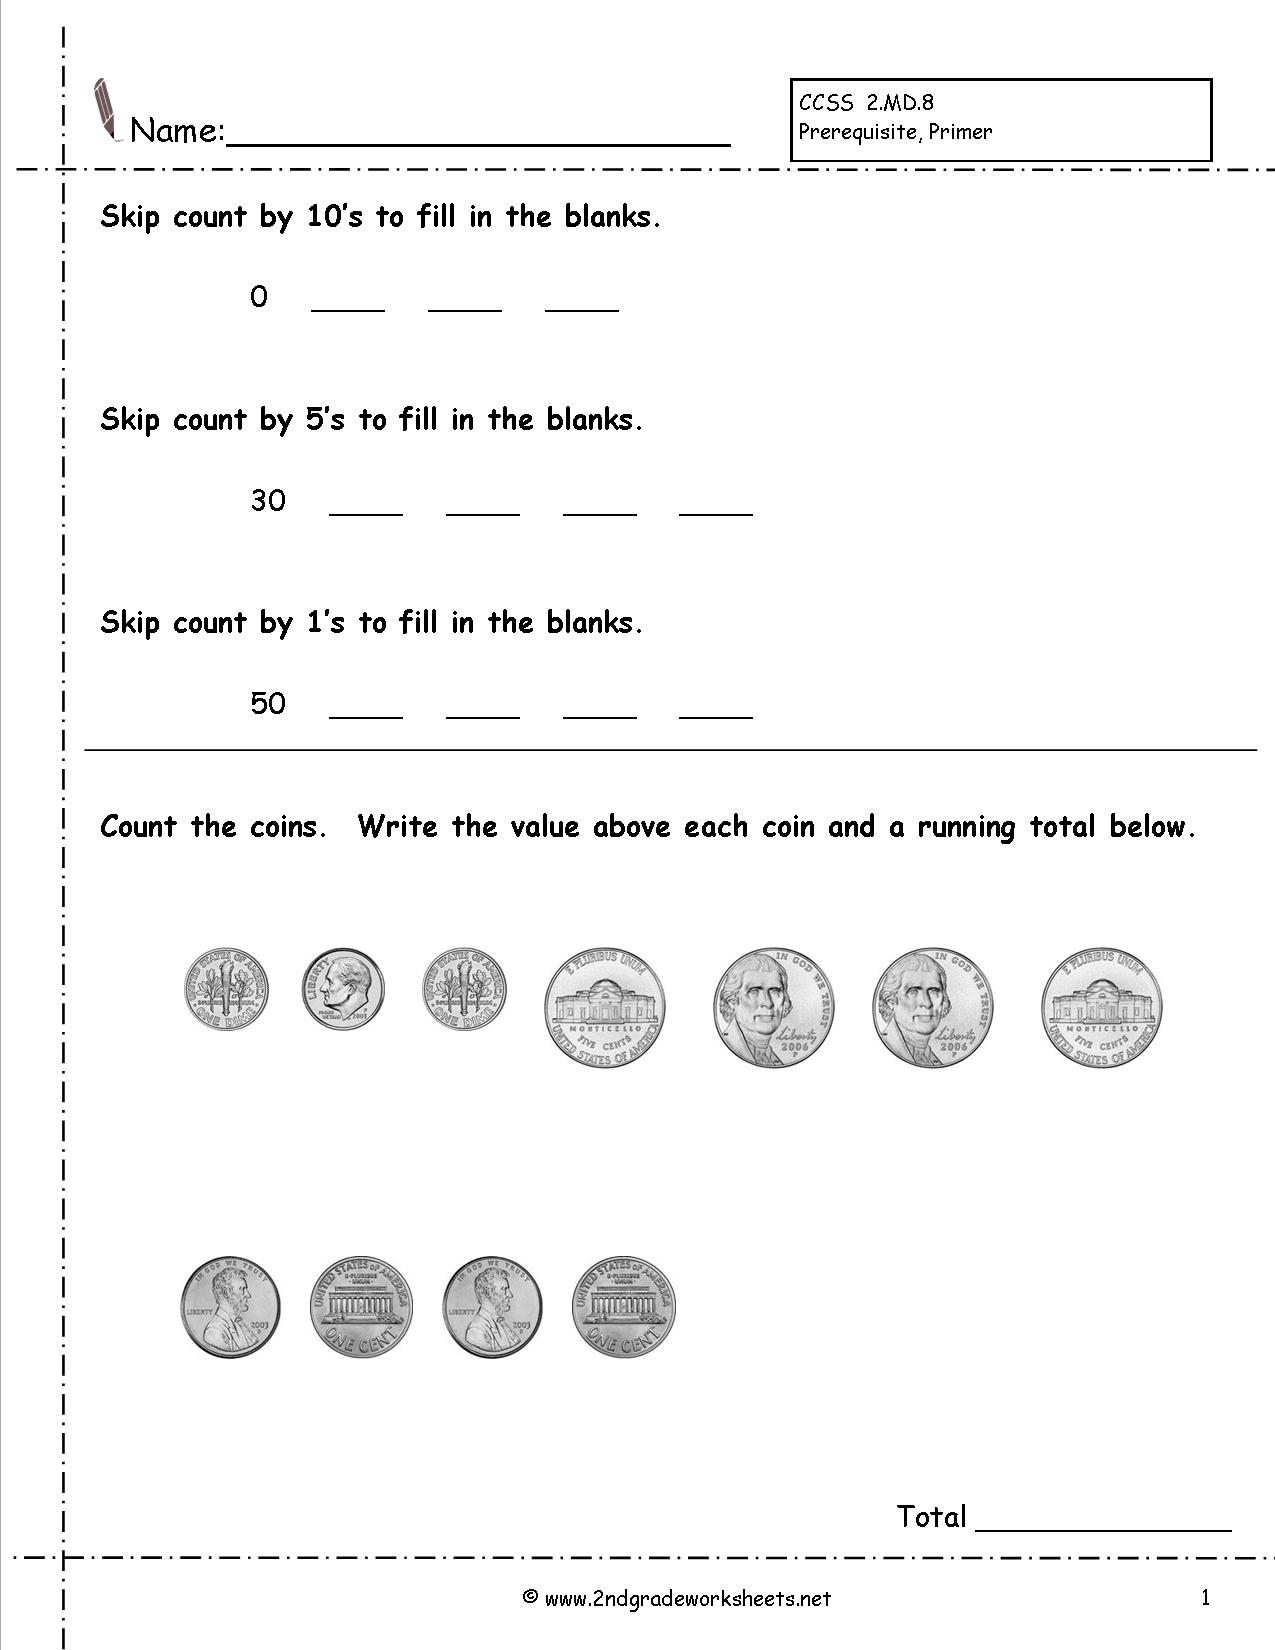 Counting Coins And Money Worksheets And Printouts - Free Printable Money Activities